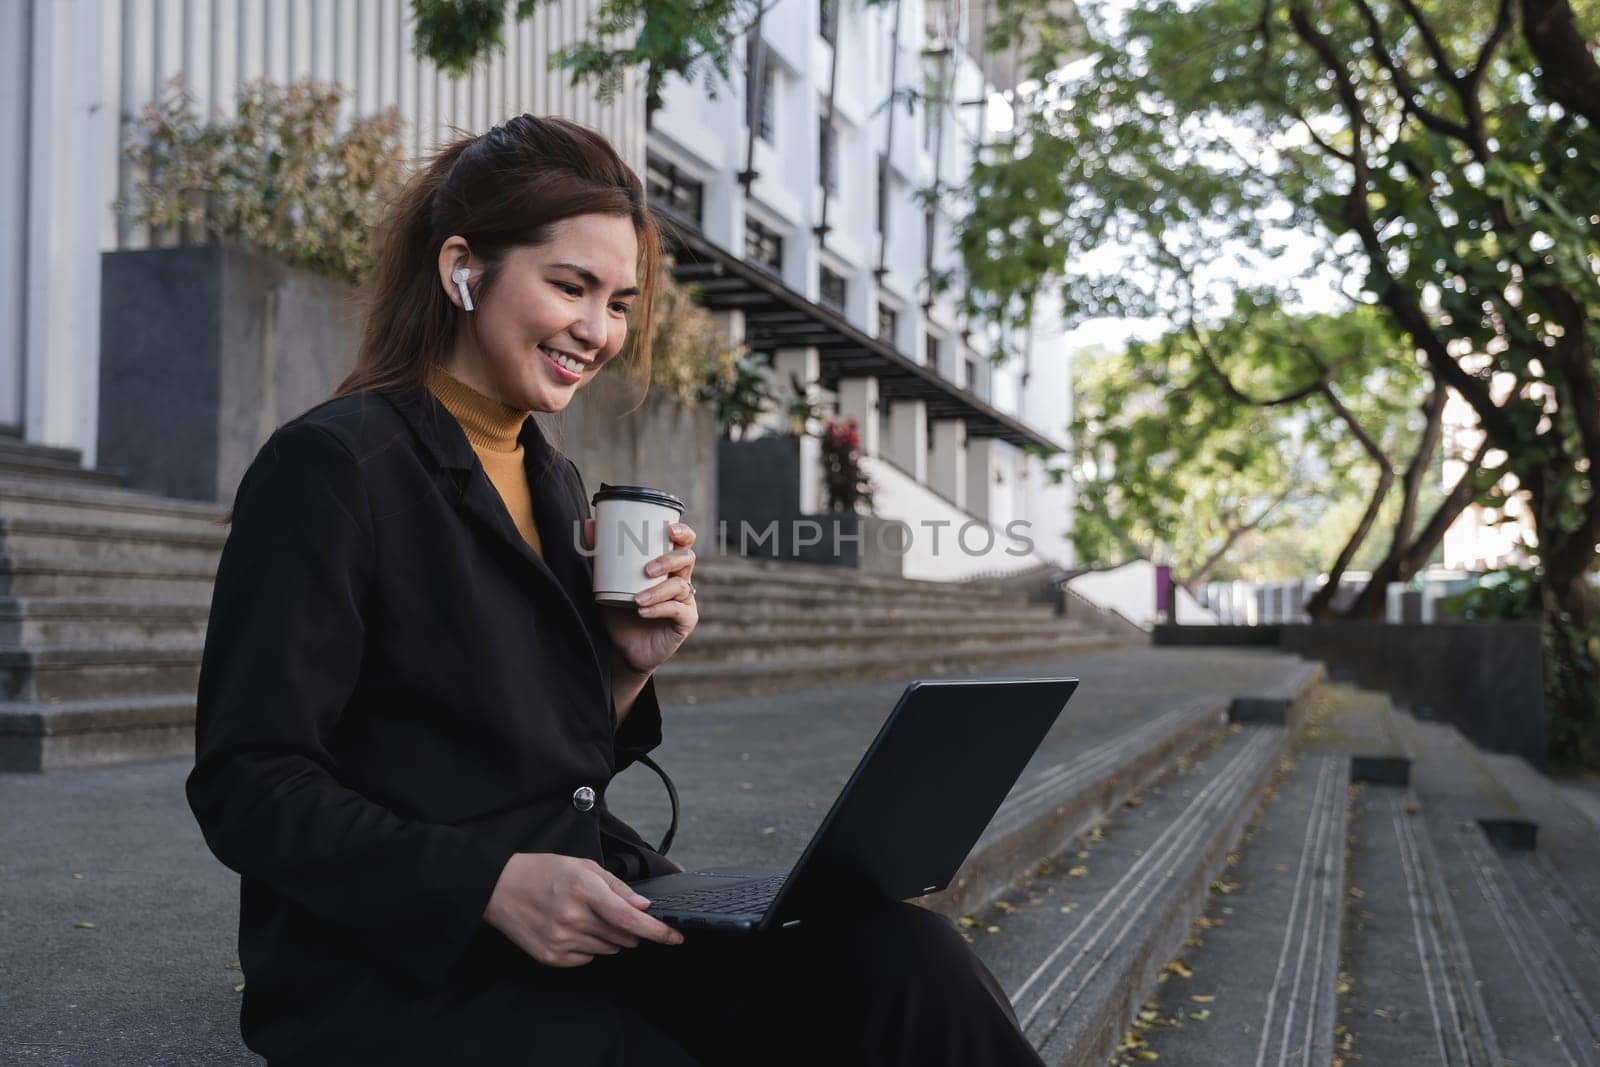 A woman in a black suit is sitting on a step with a laptop in front of her.